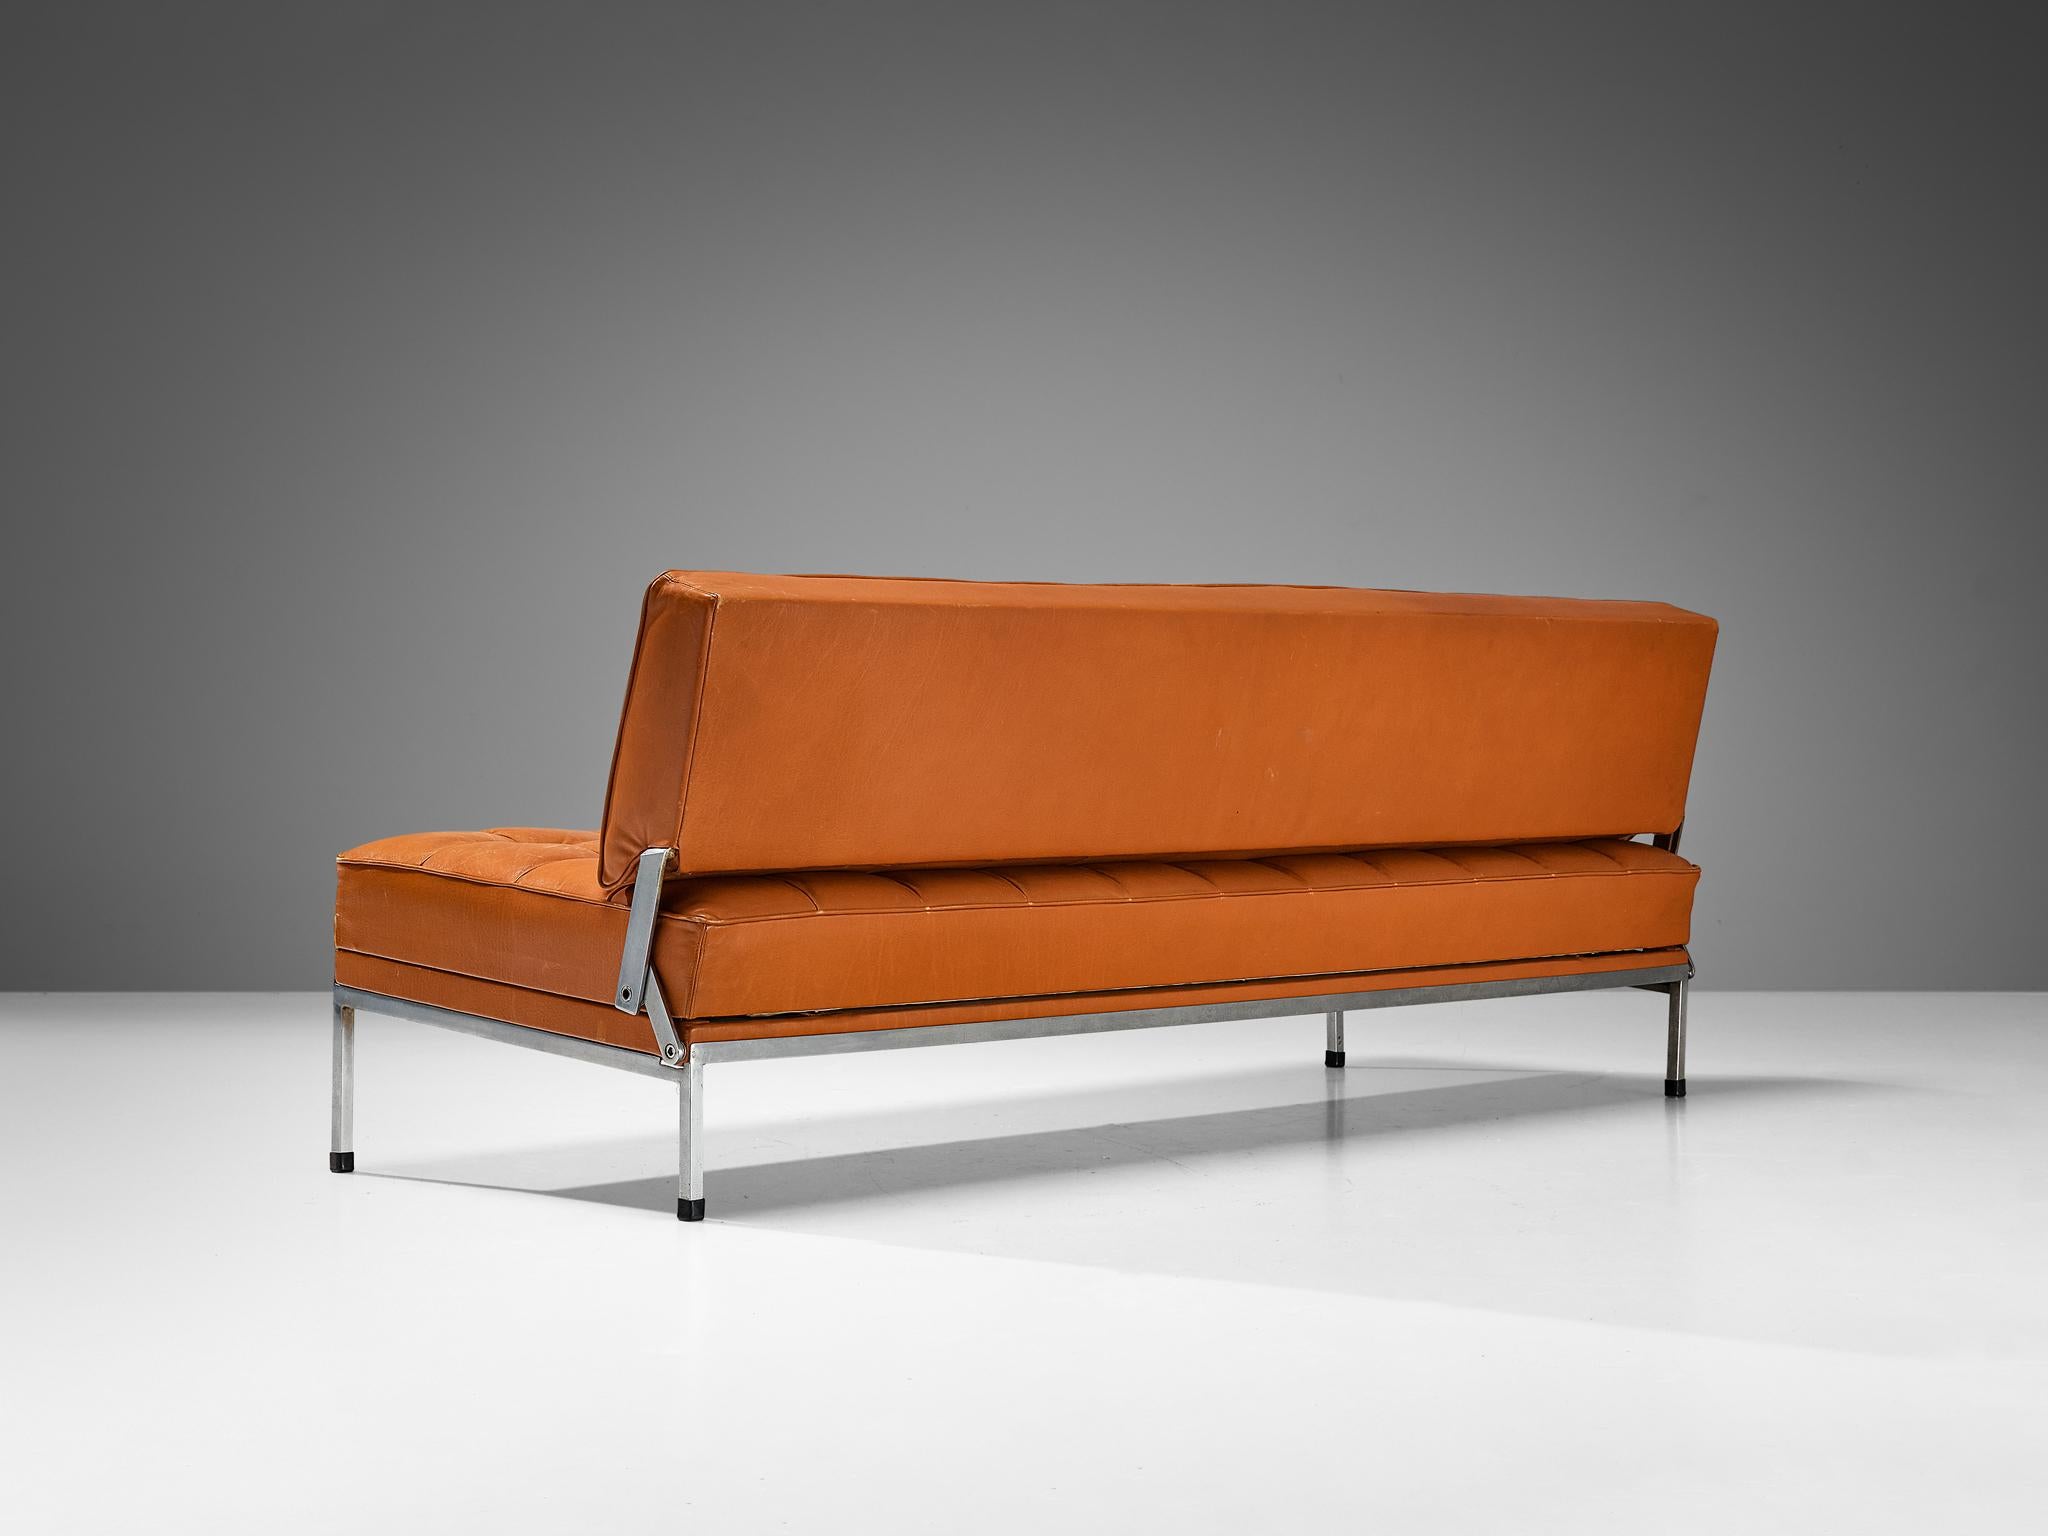 Johannes Spalt 'Constanza' Sofa Daybed in Cognac Leather  For Sale 1